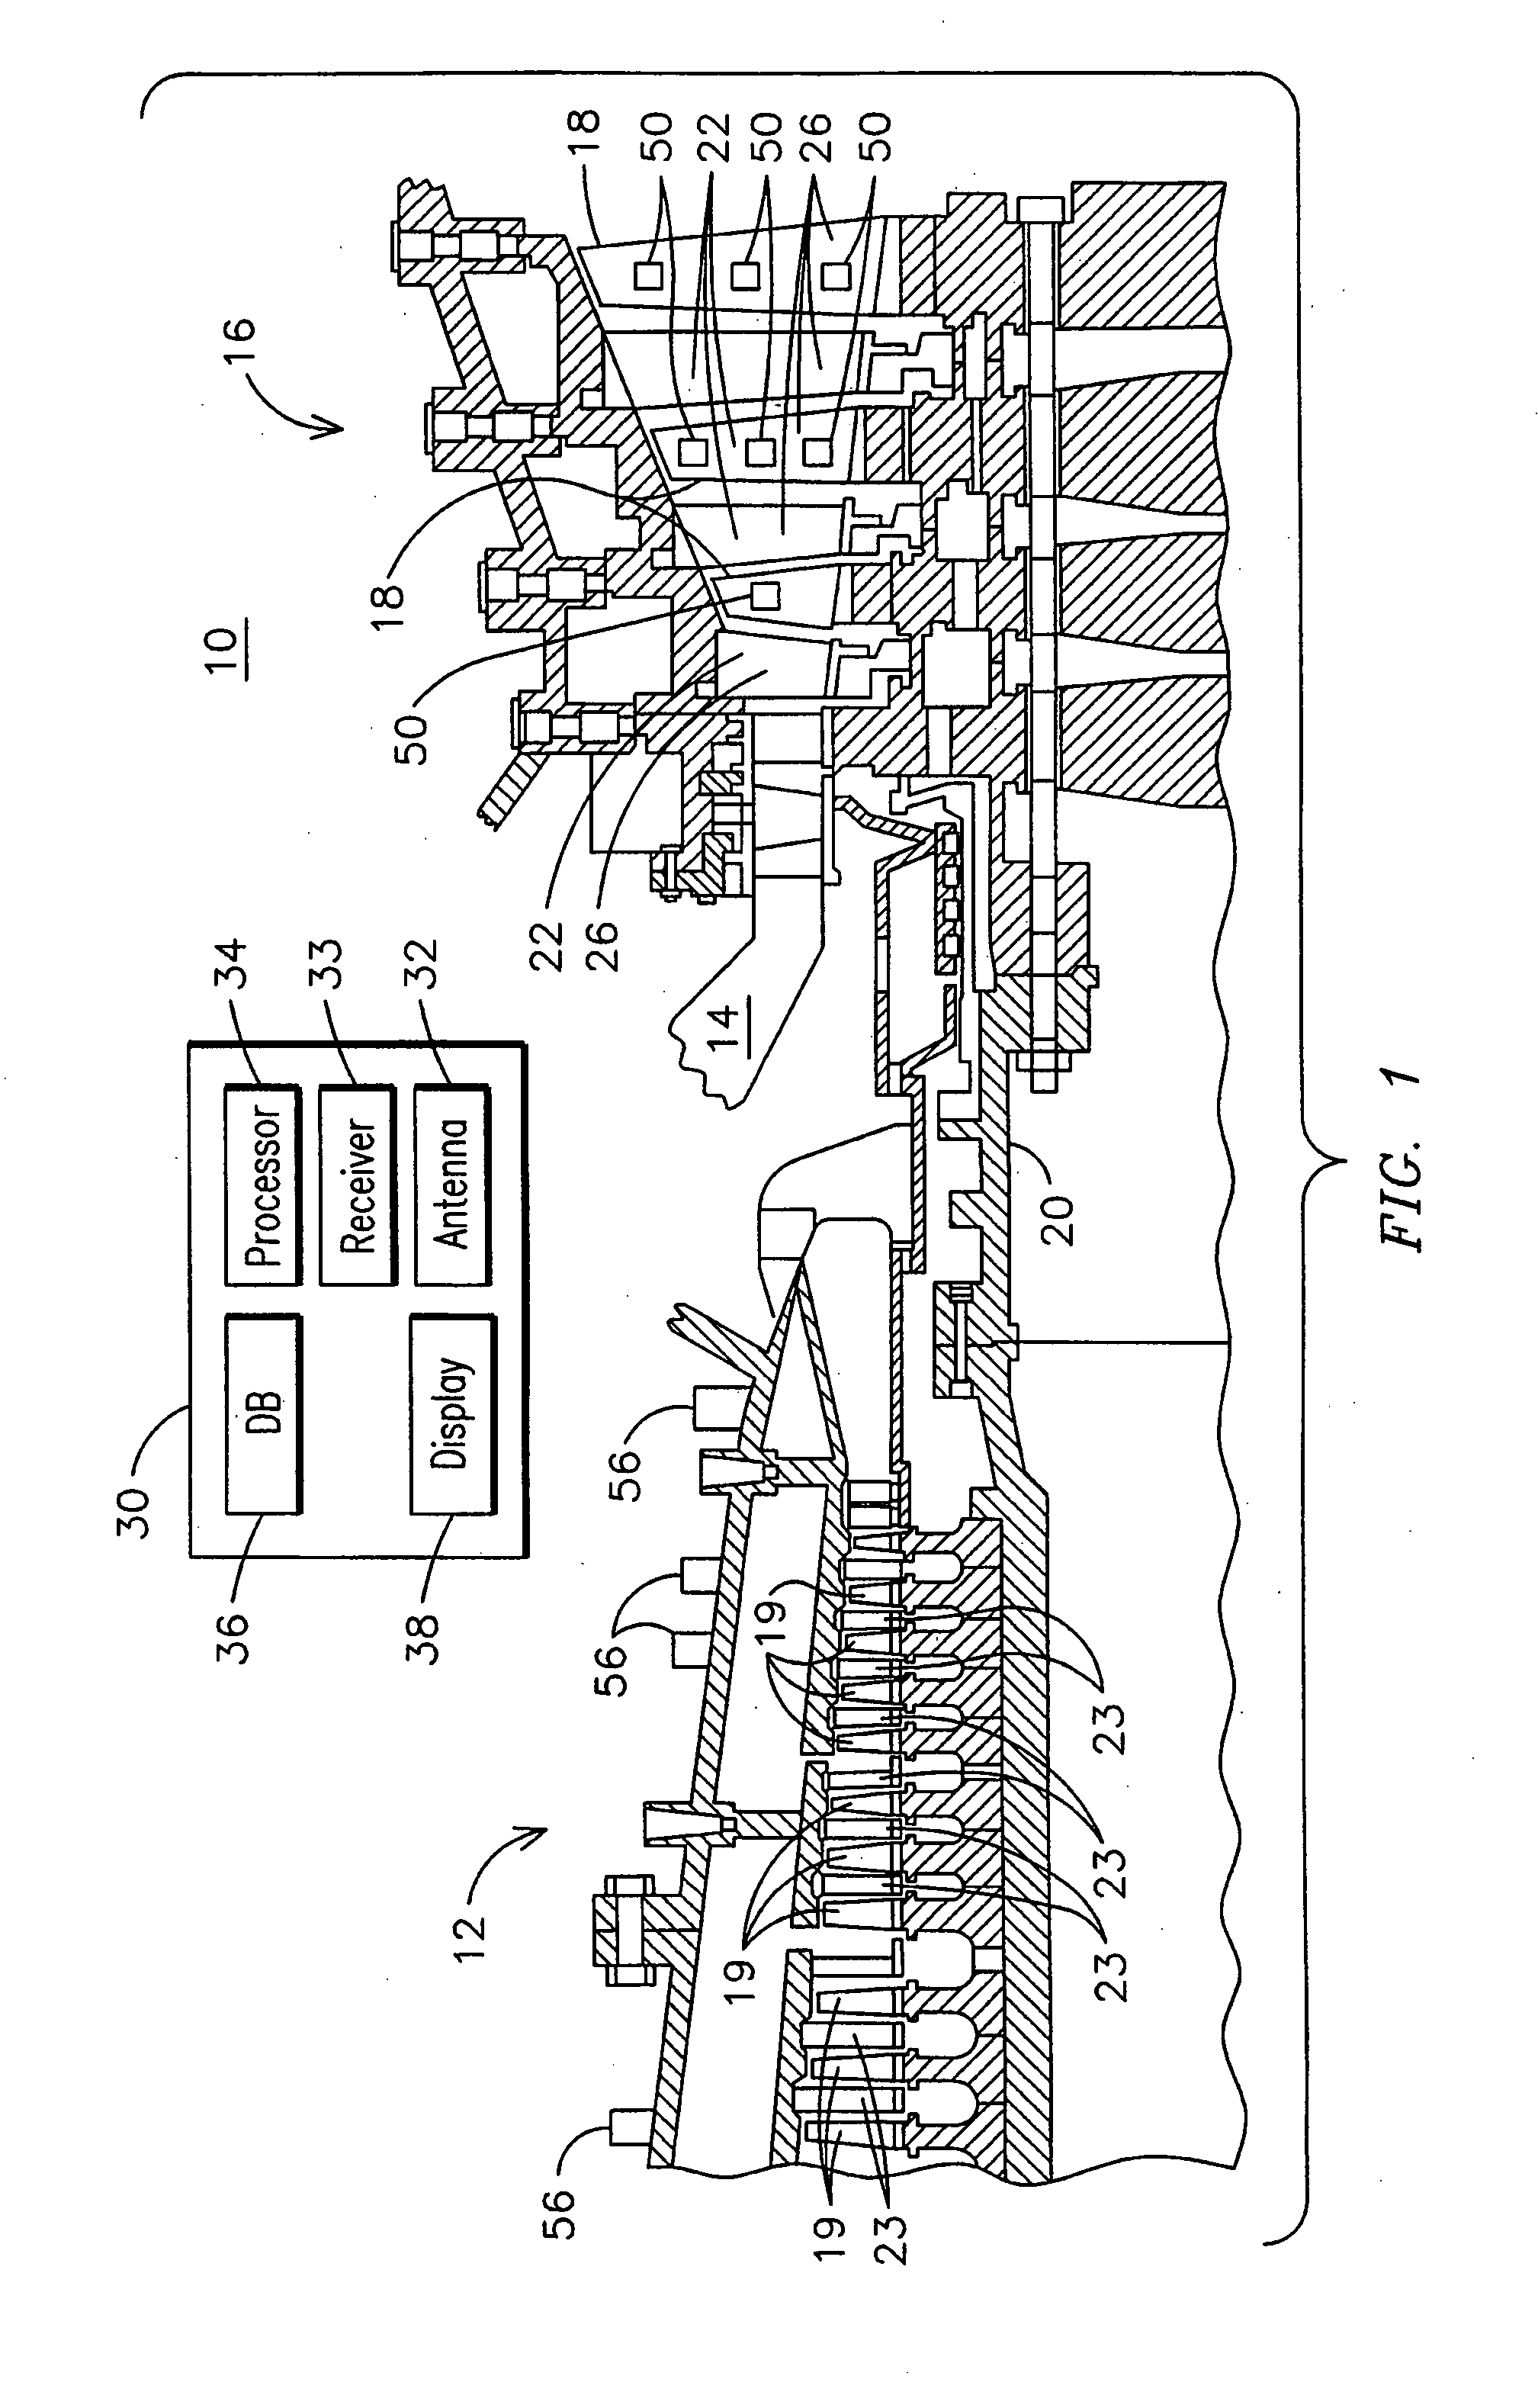 Method of instrumenting a component